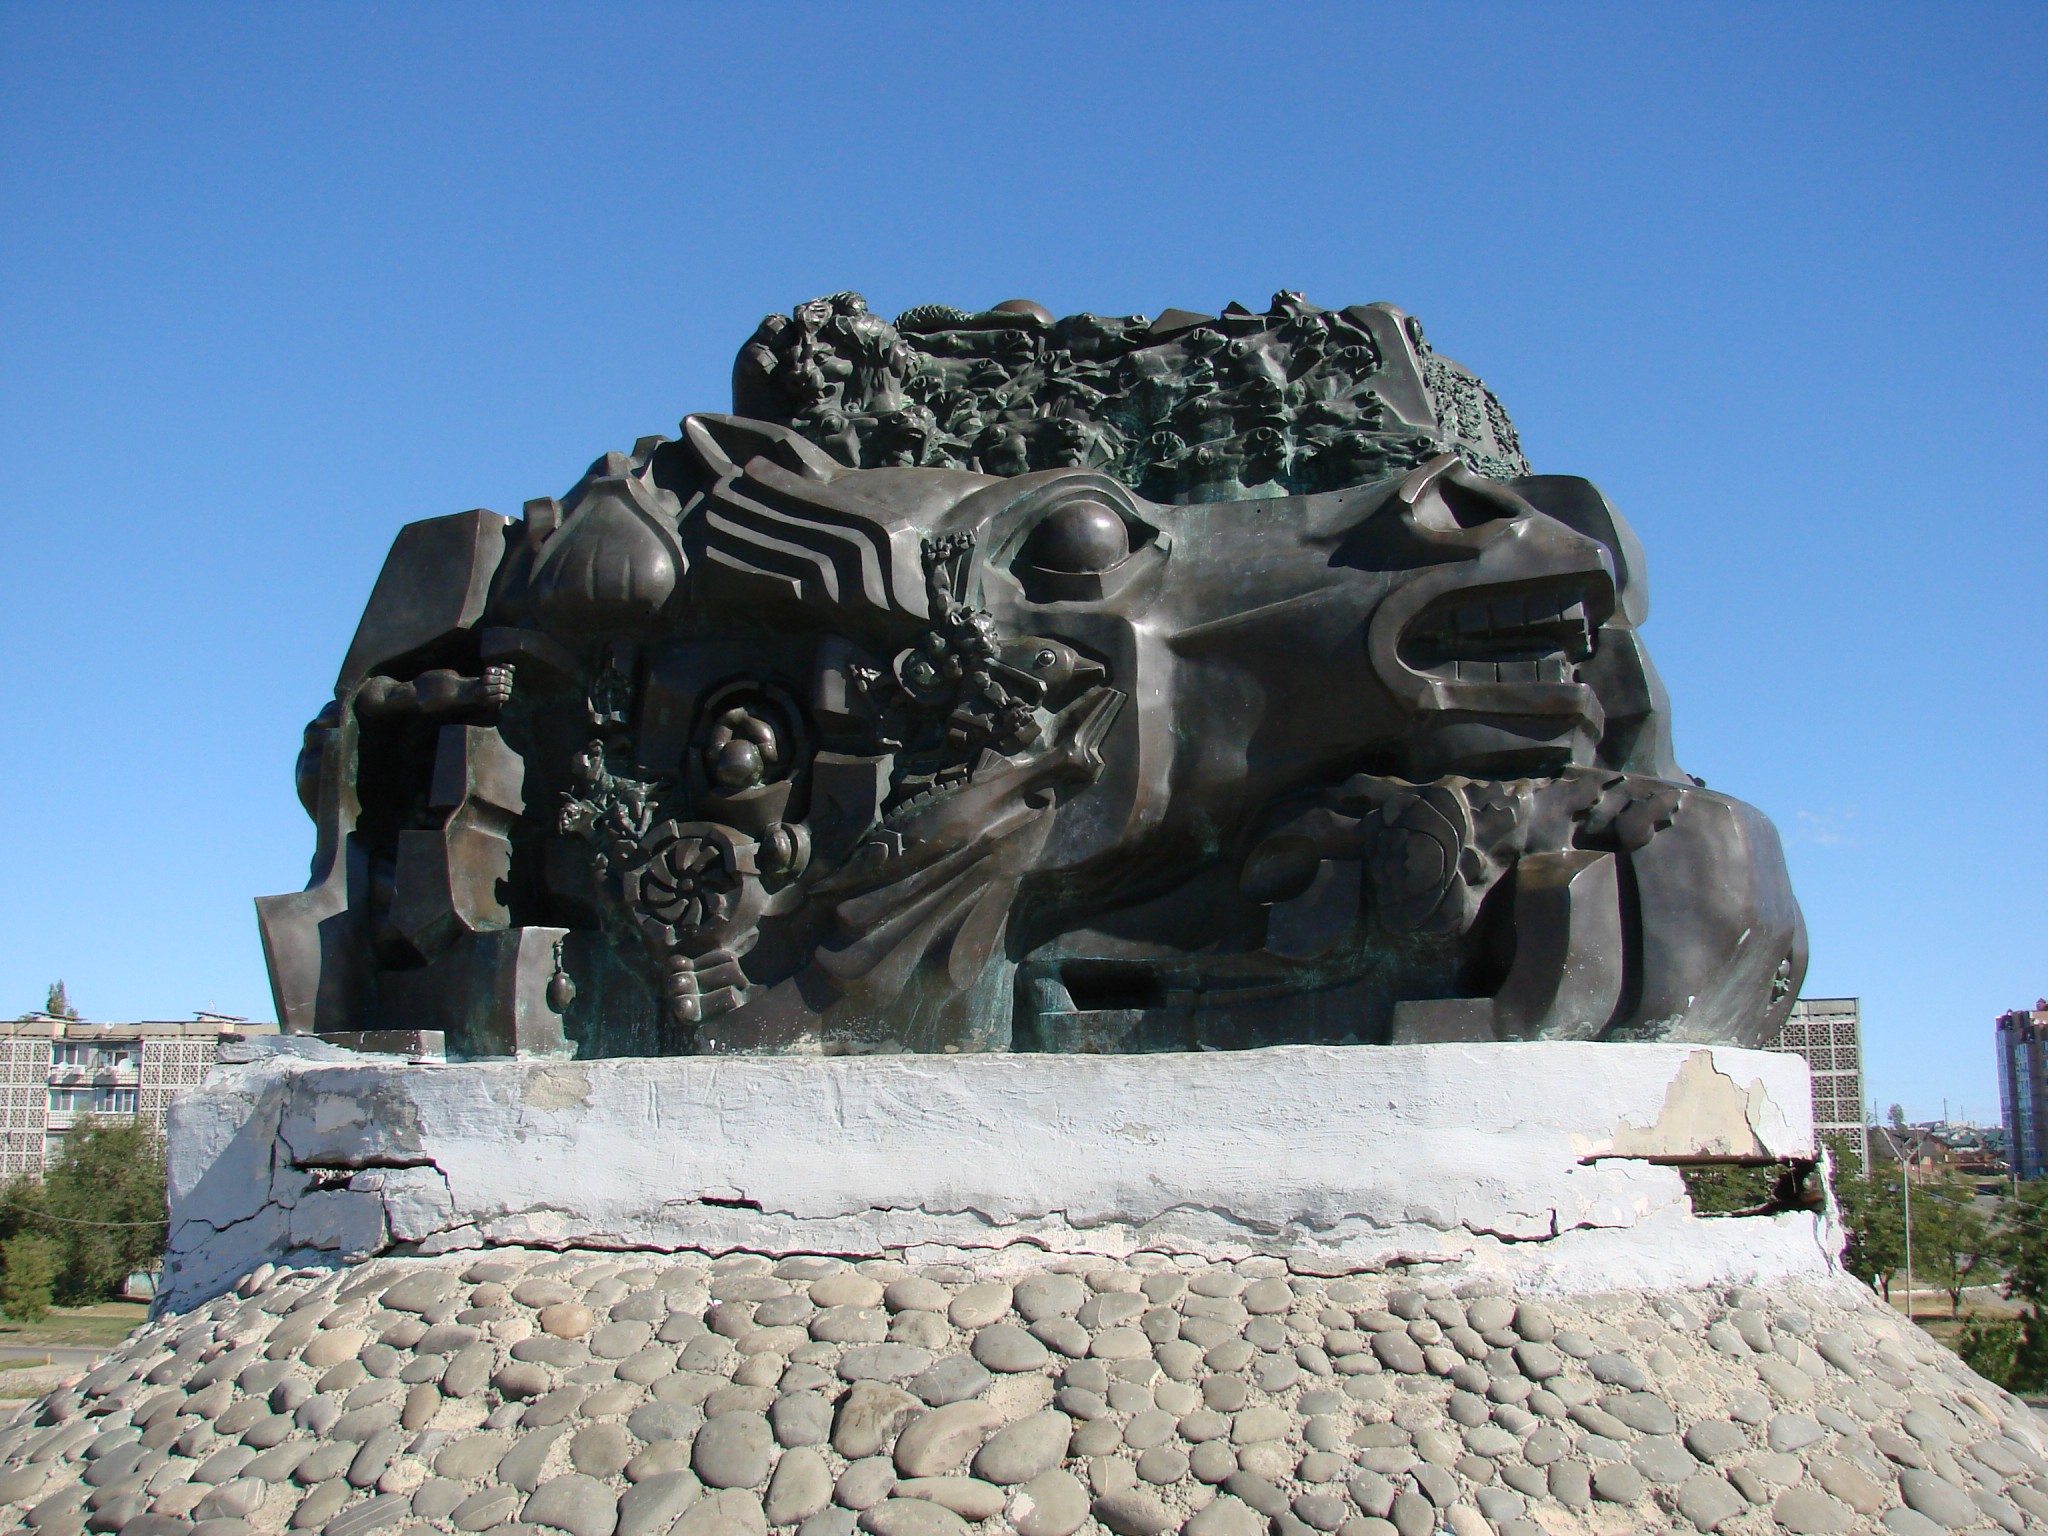 Monument to the deported Kalmyks. Erected in Kalmyk capital Elista in 1996.